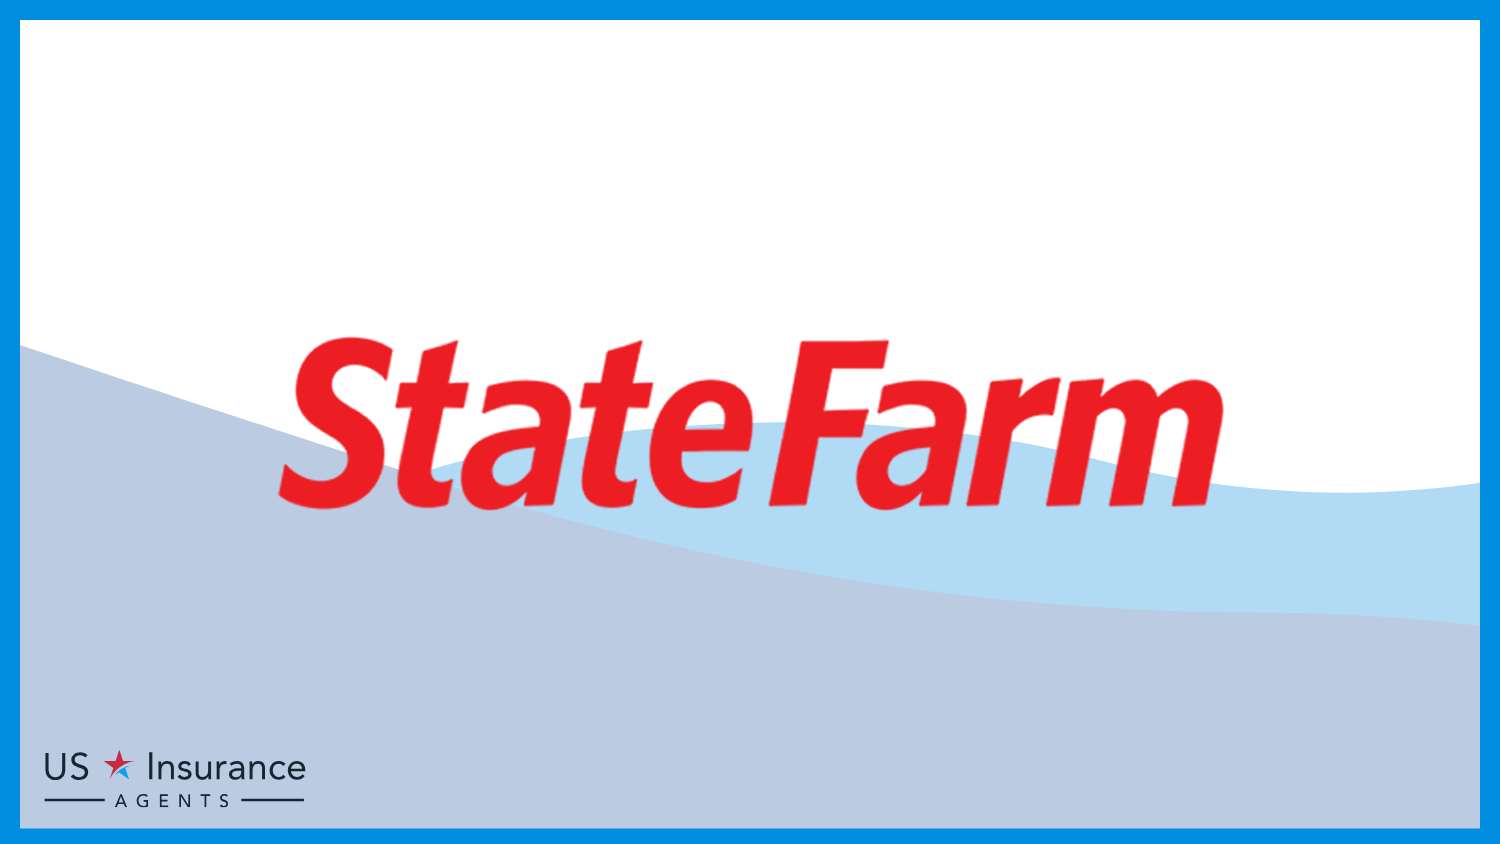 State Farm: Best Business Insurance for Car Washes